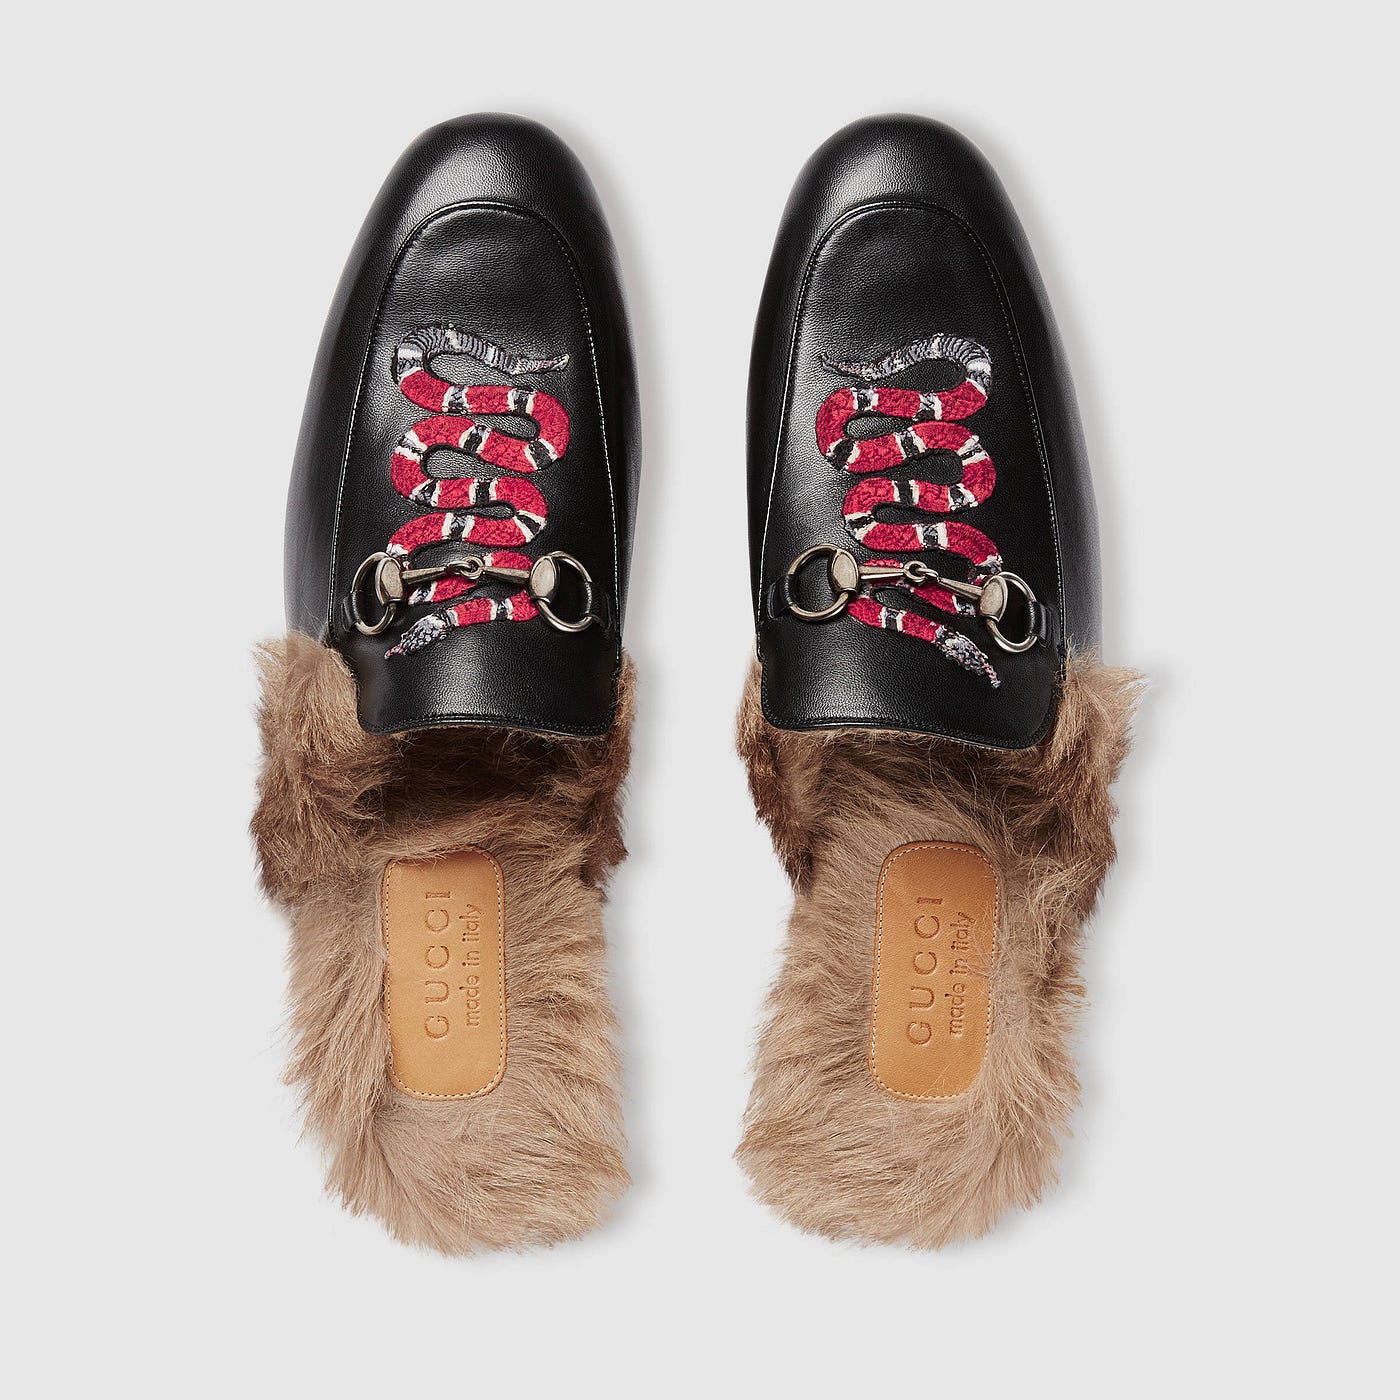 Review: Gucci Princetown Leather Slipper (with Snake) | by JB Sacman |  Medium